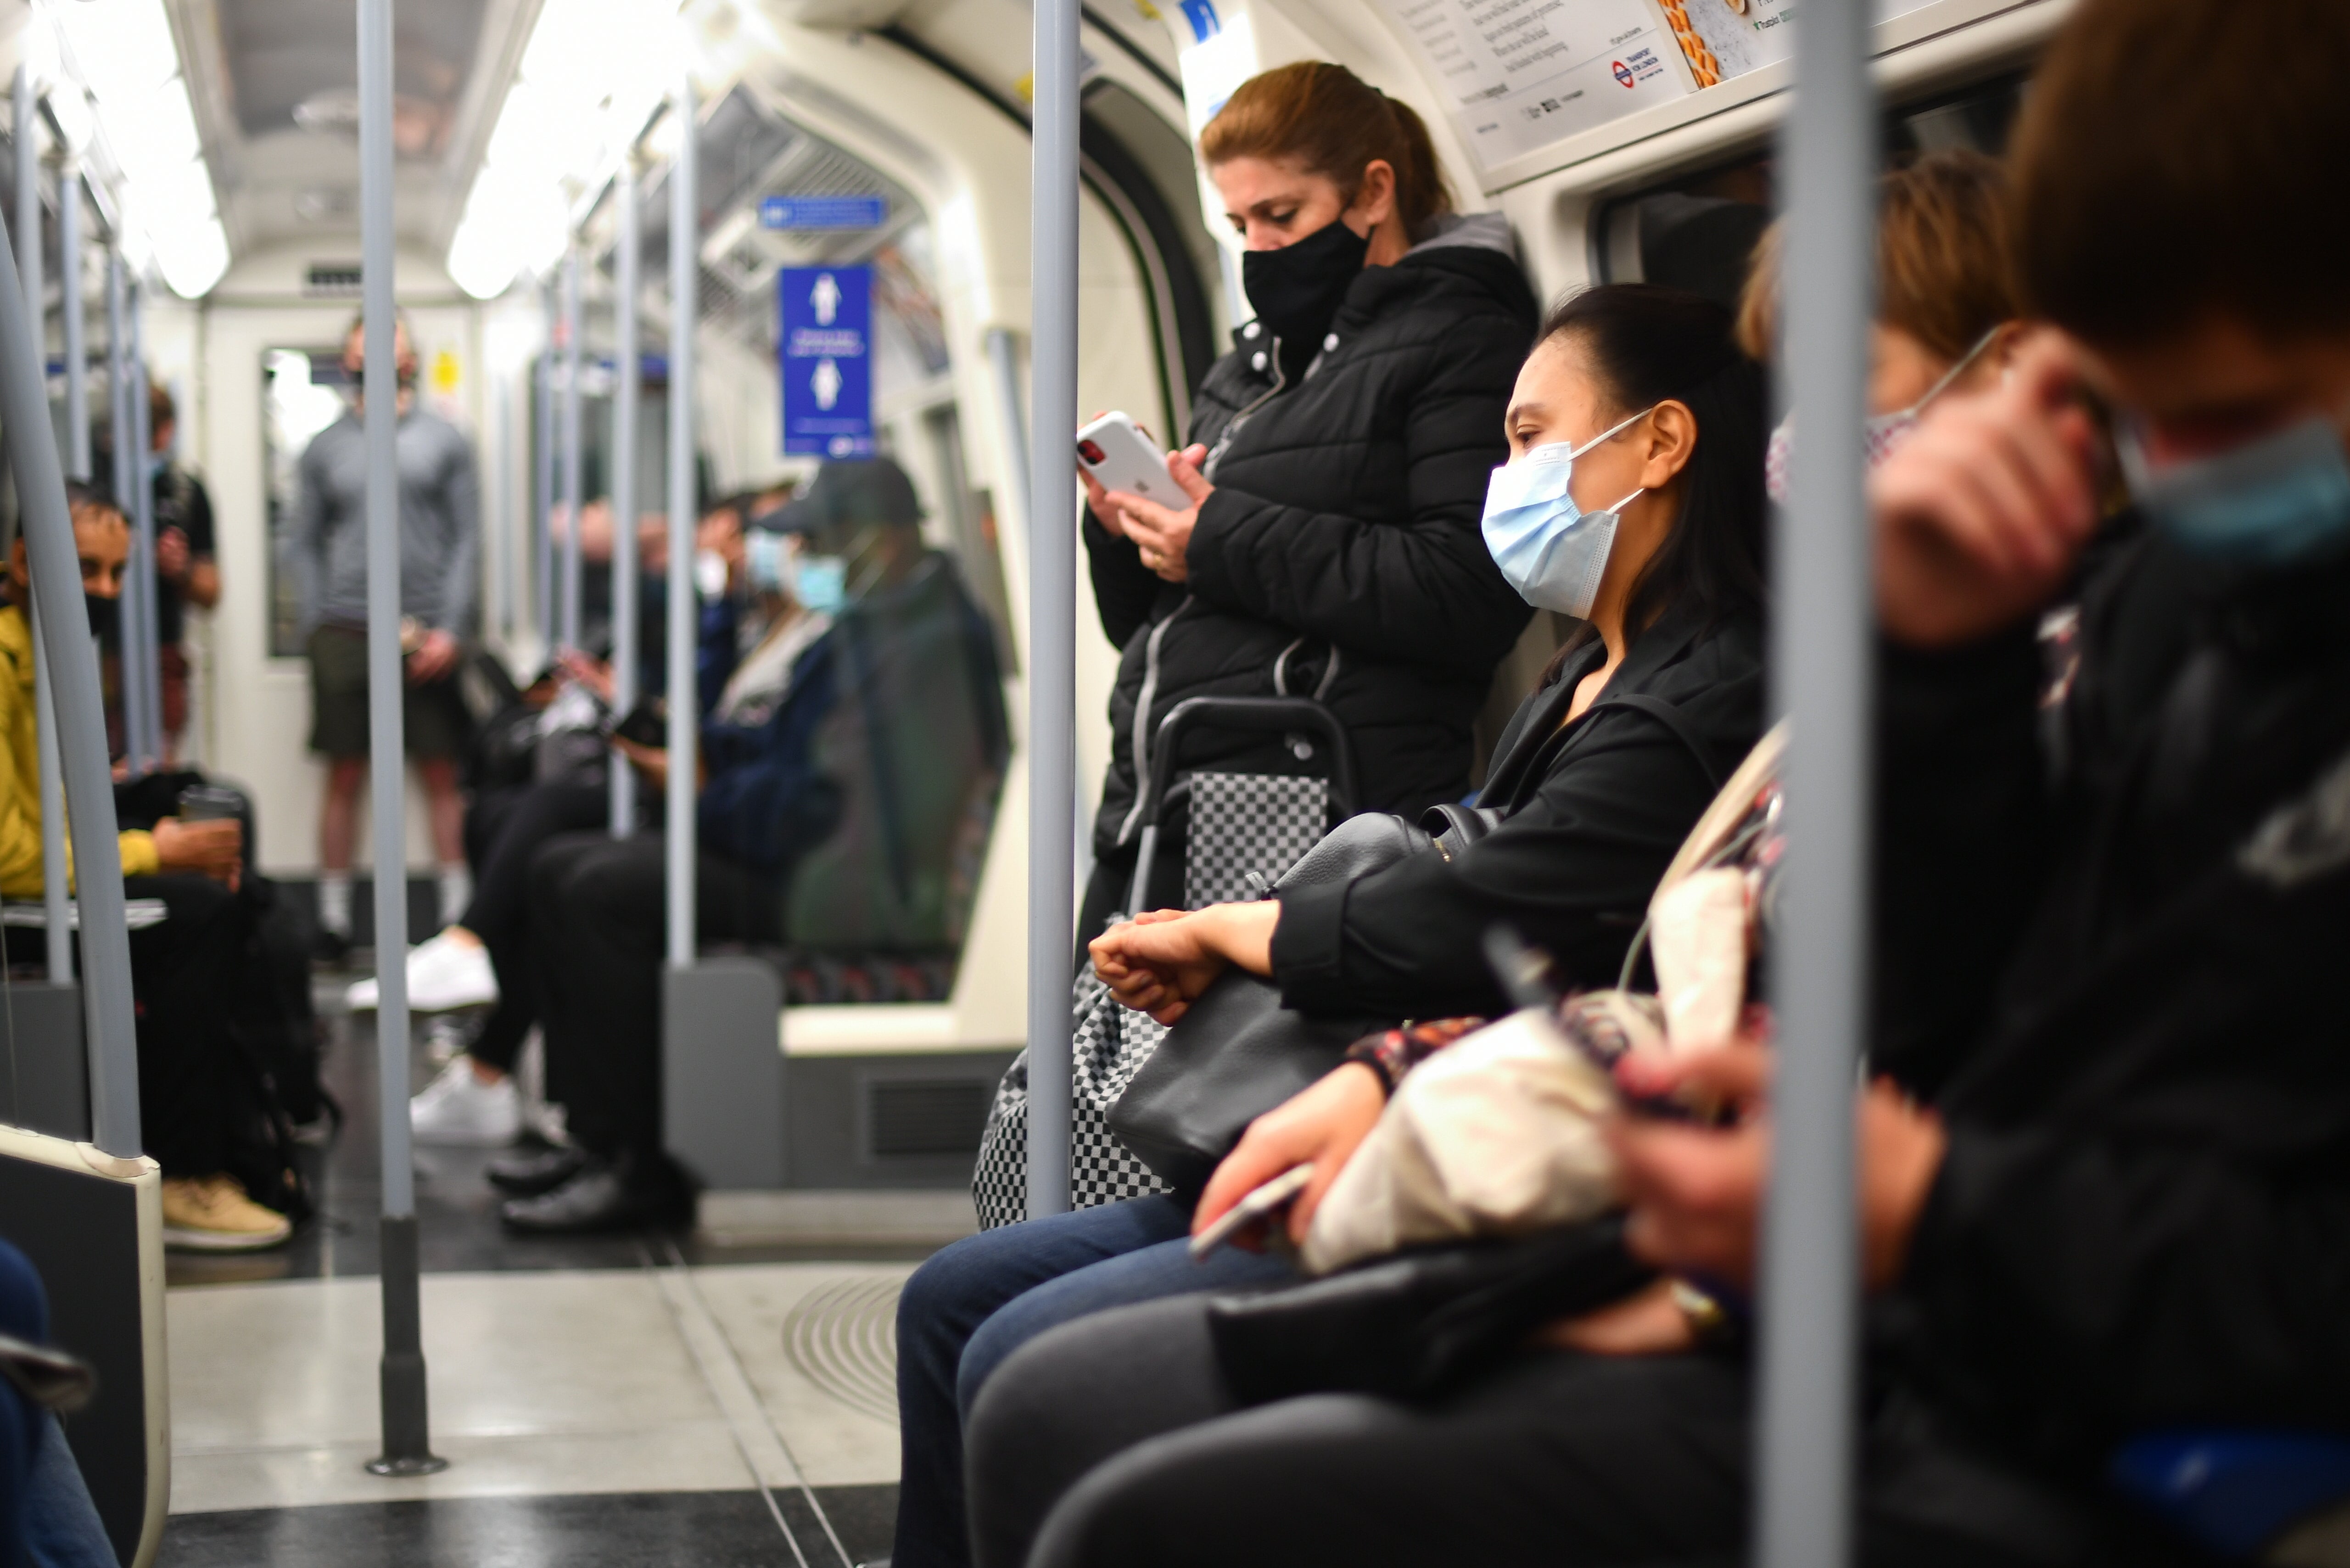 Some groups want a return to mandatory face masks, like on London’s underground system